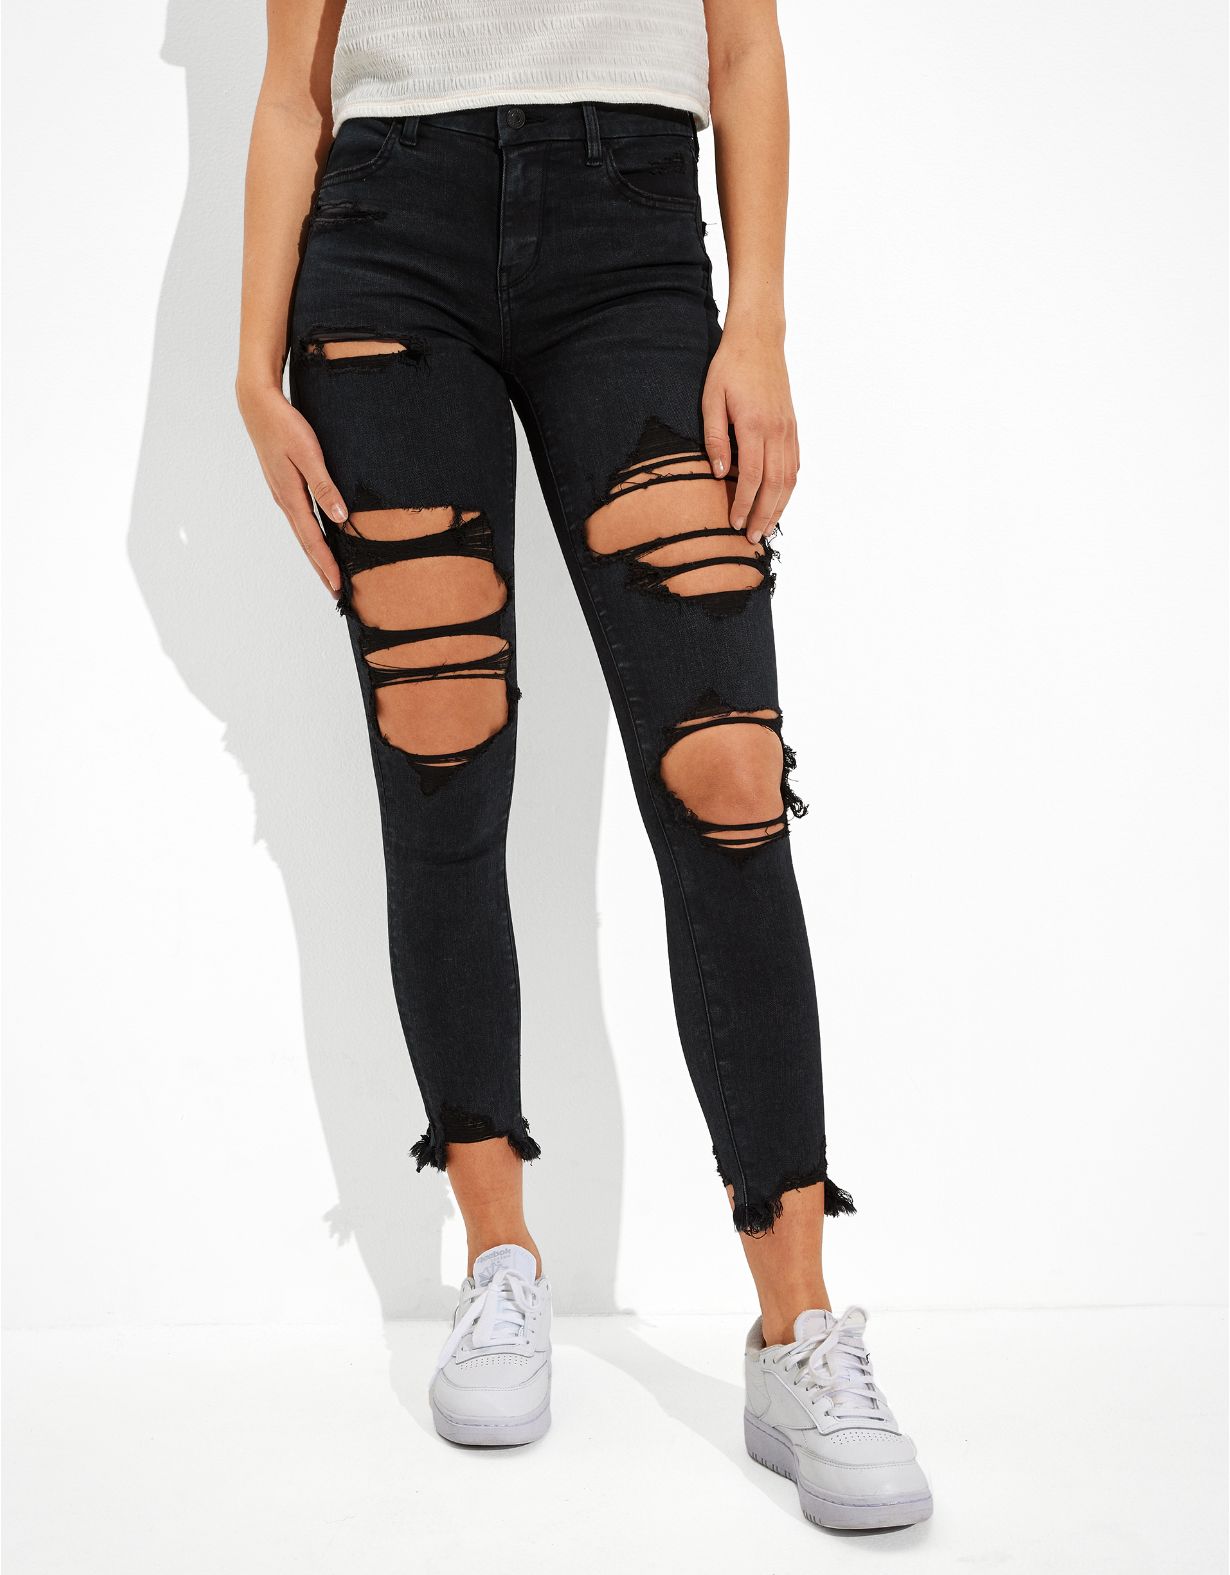 AE Forever Soft High-Waisted Jegging Crop con rasgados